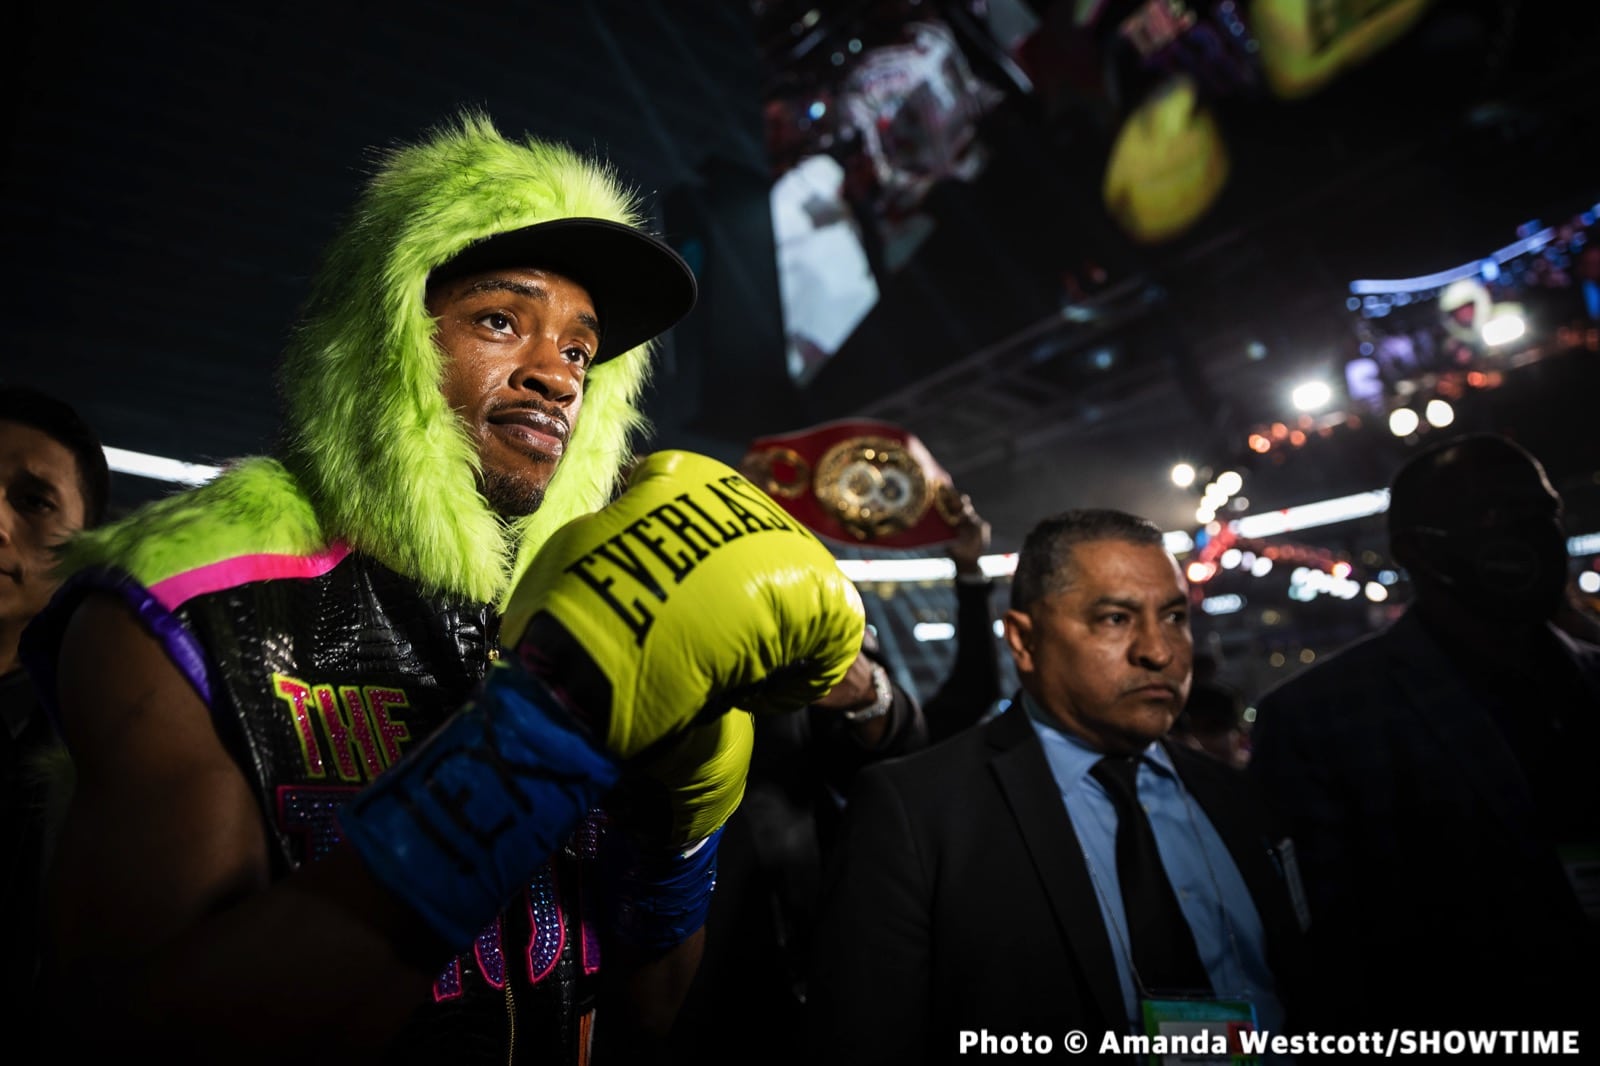 Image: Errol Spence vs. Terence Crawford preview by Danny Garcia